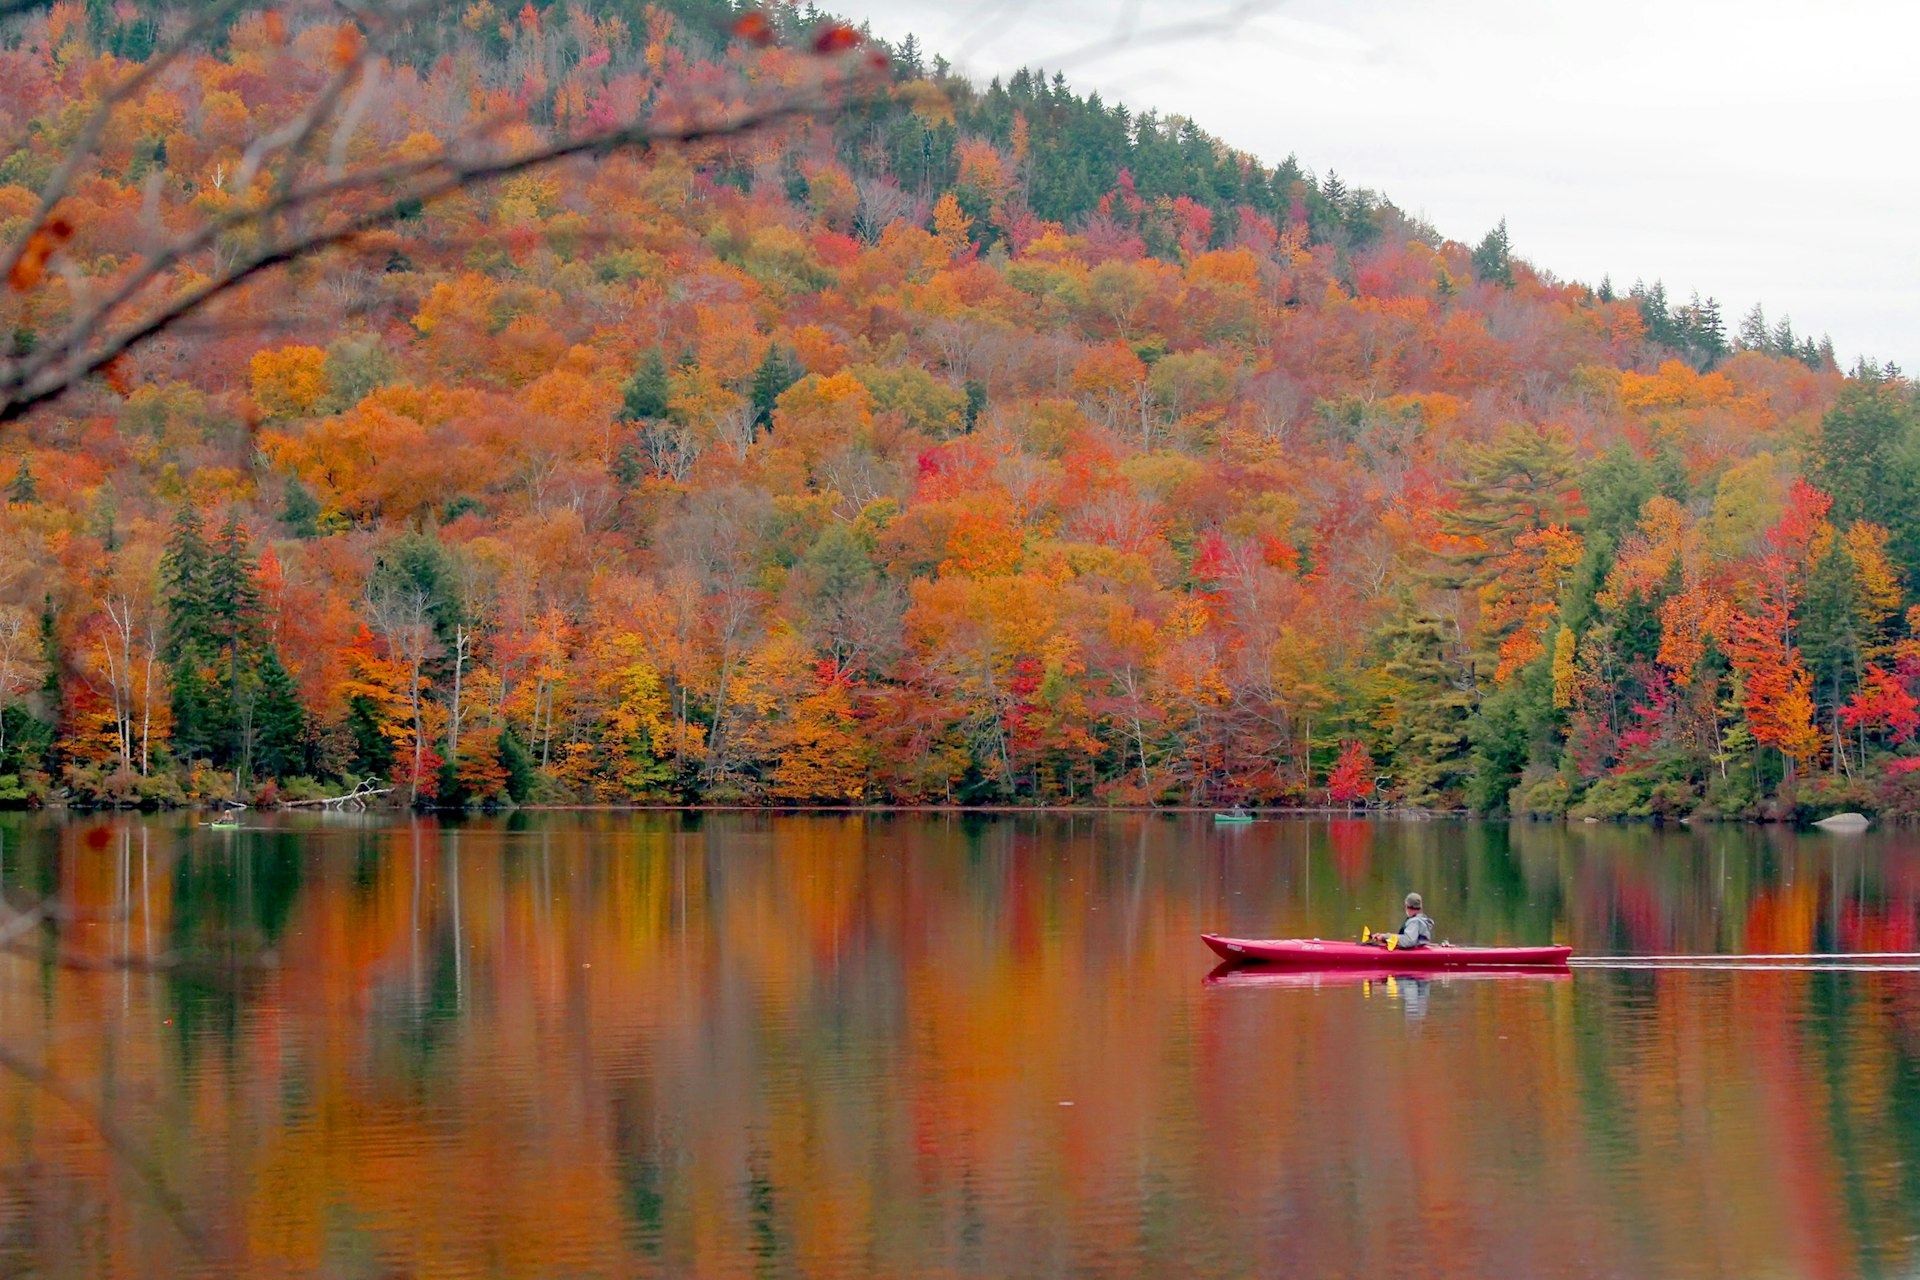 New England is known for its fall colors, and New Hampshire might have the best of all